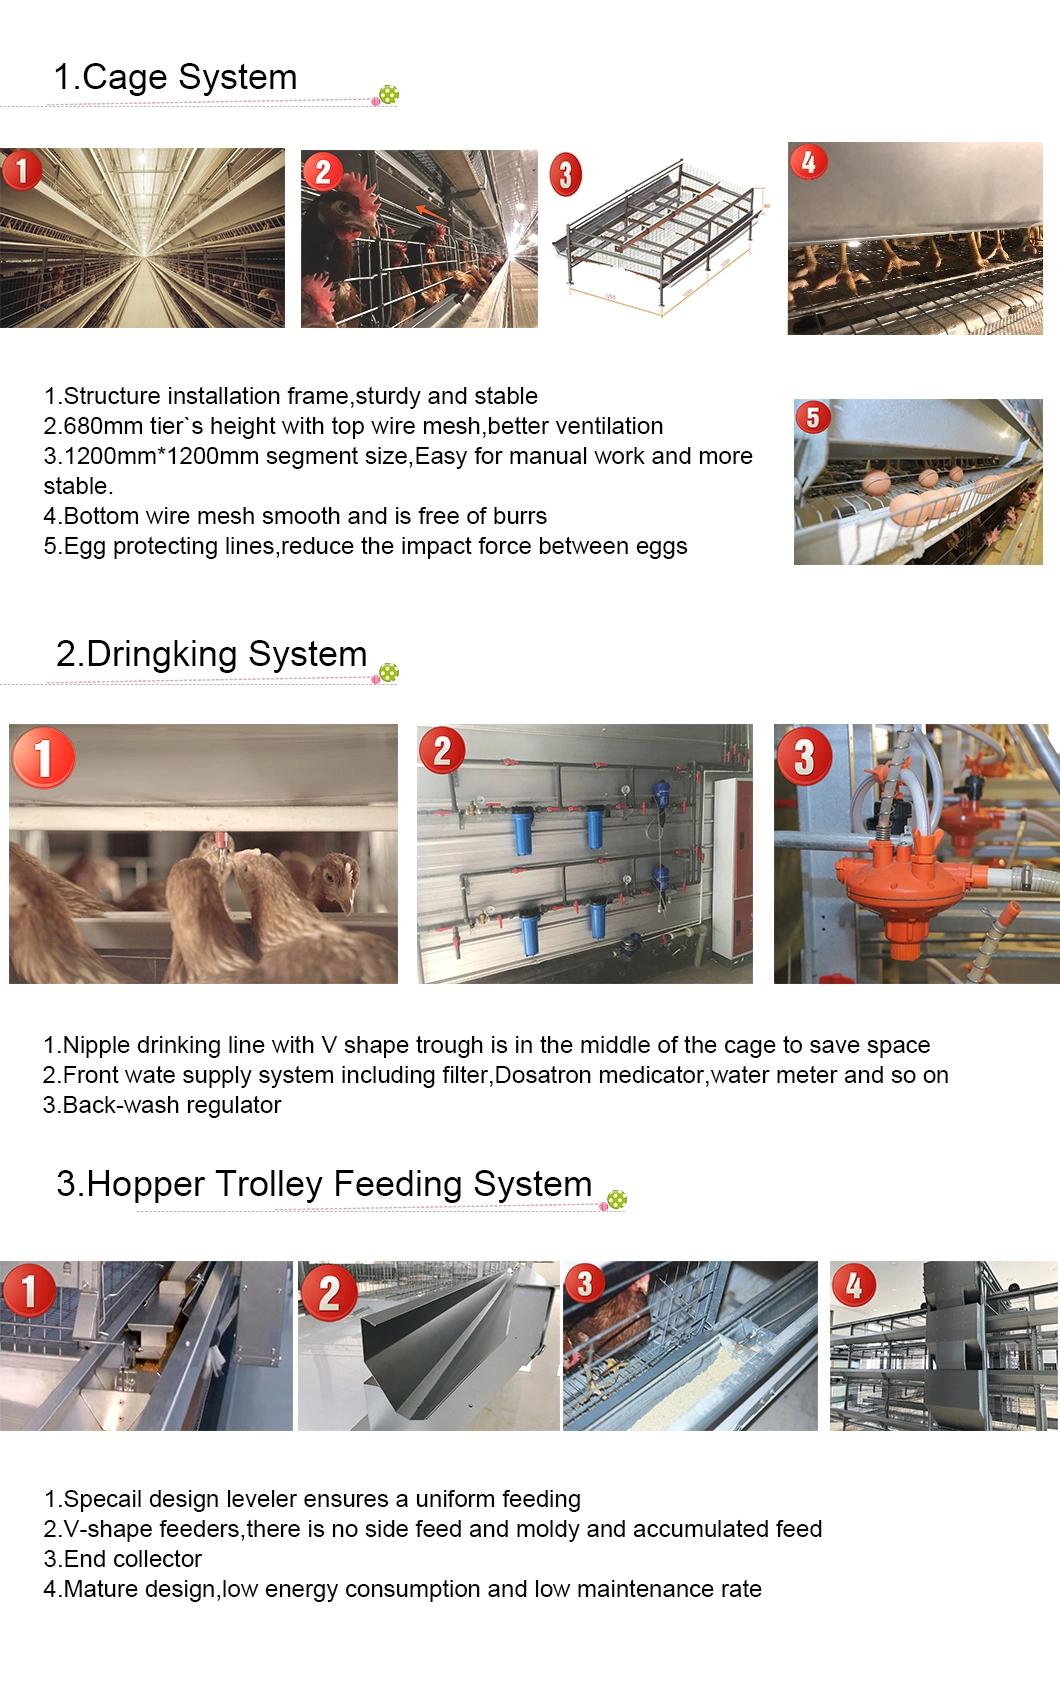 New Dairy Machine Computerized Poultry Drinkers Mature Design Egg Factory Equipment